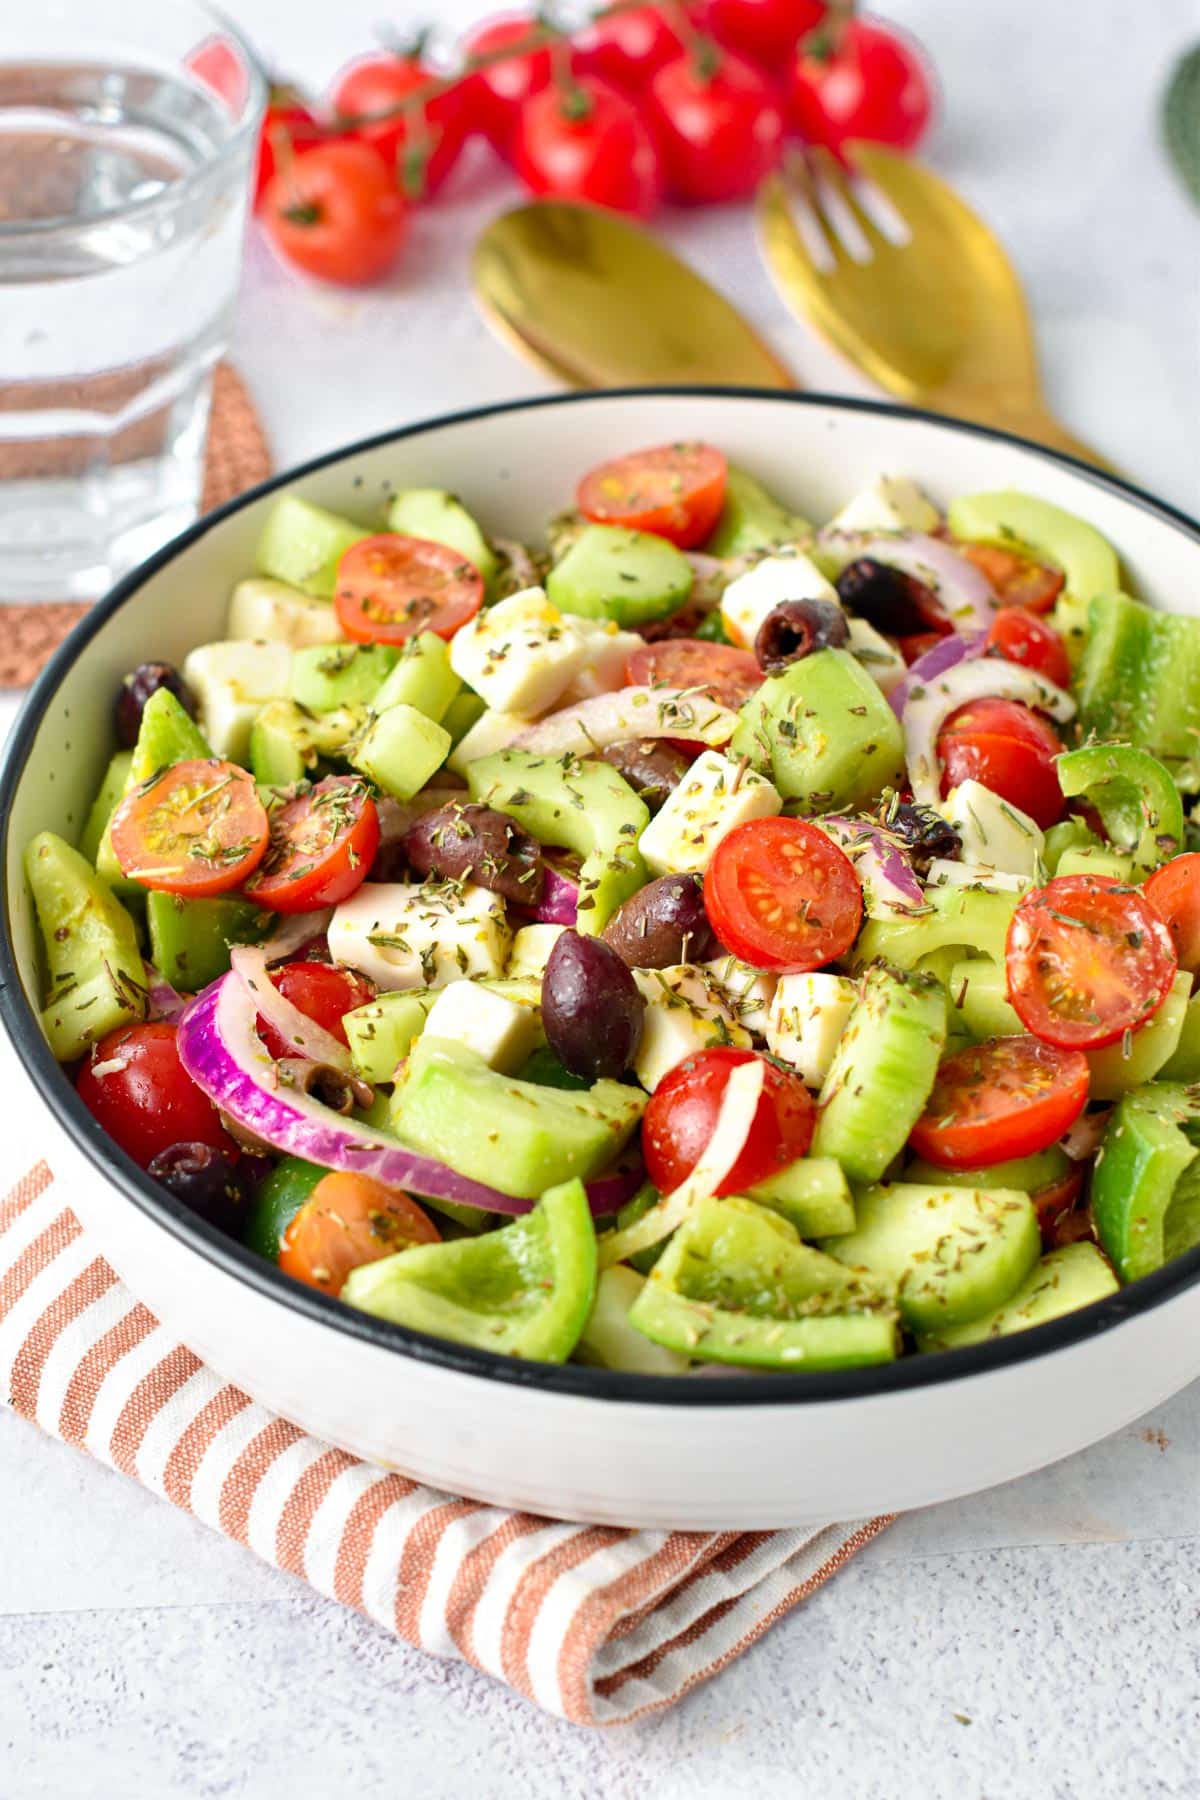 This Greek Salad Recipe is the most easy refreshing Mediterranean salad with crunchy vegetable, creamy feta cheese and tangy red wine salad dressing. Plus, all you need is barely 15 minutes to make this salad recipe so no excuse to try it now.